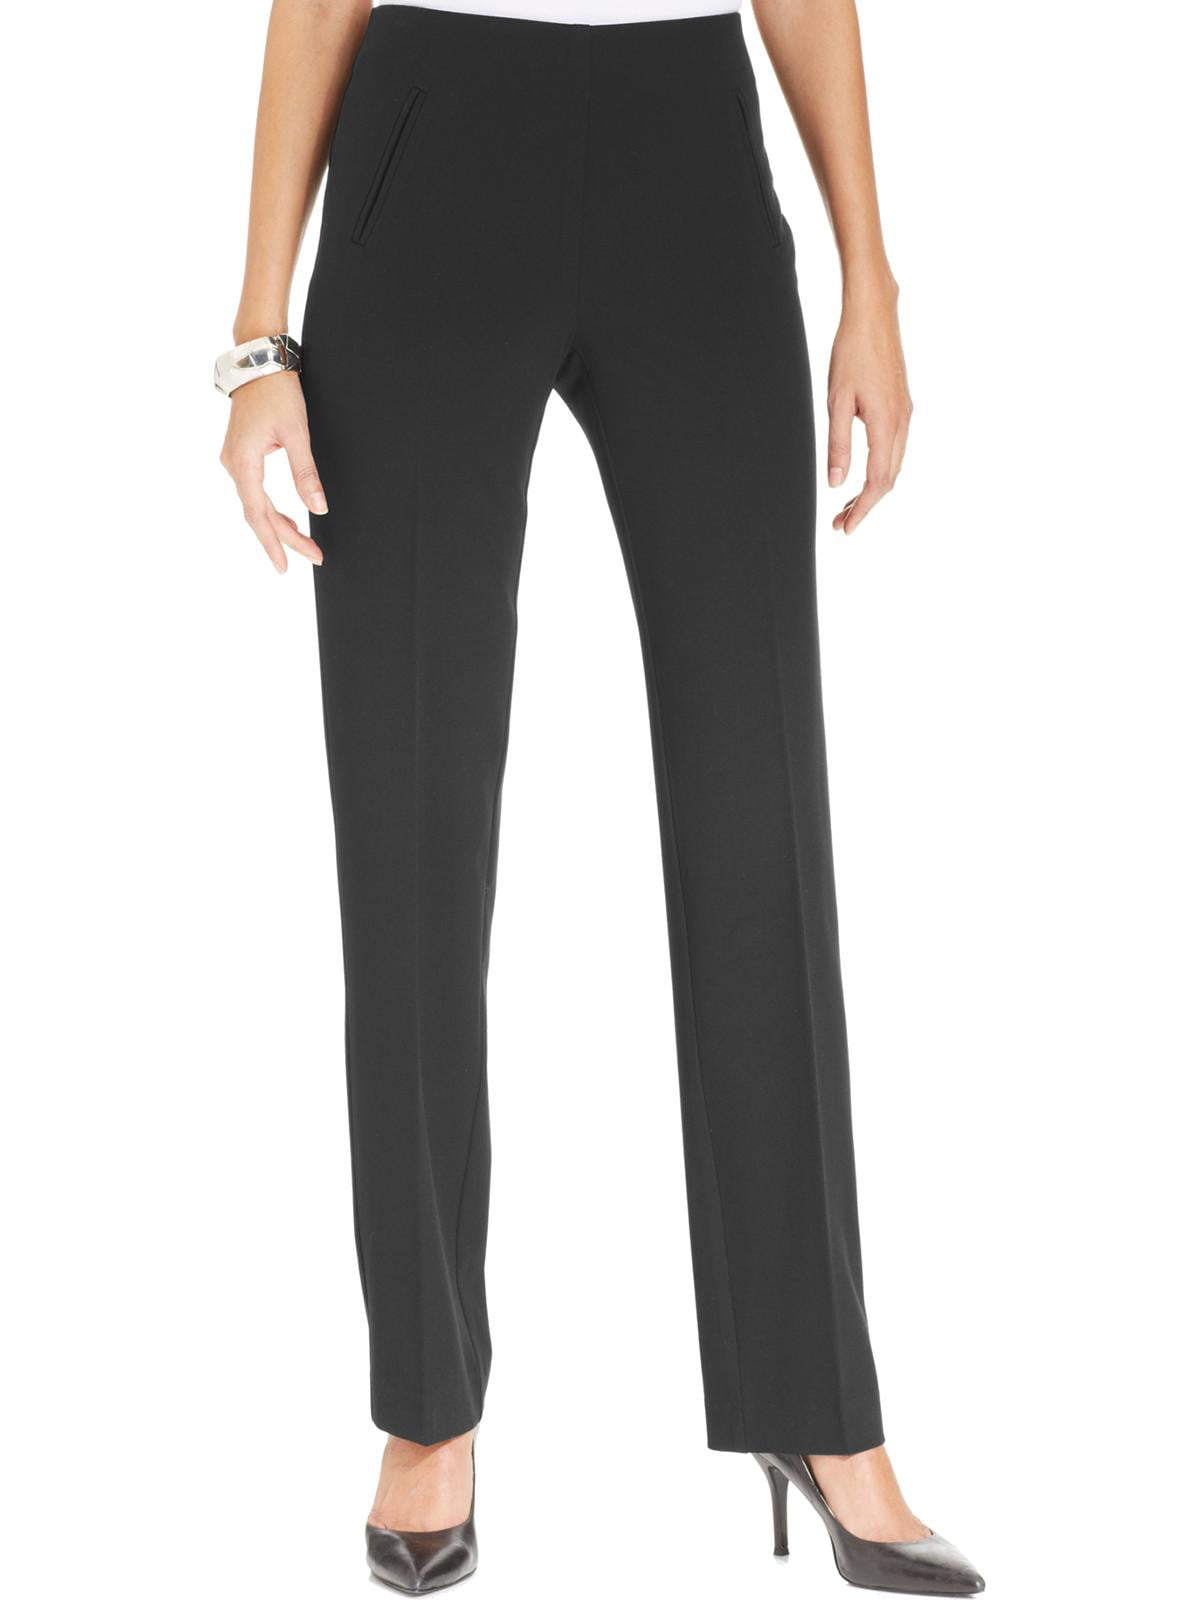 Style & Co.Women's Tummy-Control Pull-On Pants Black Size 2